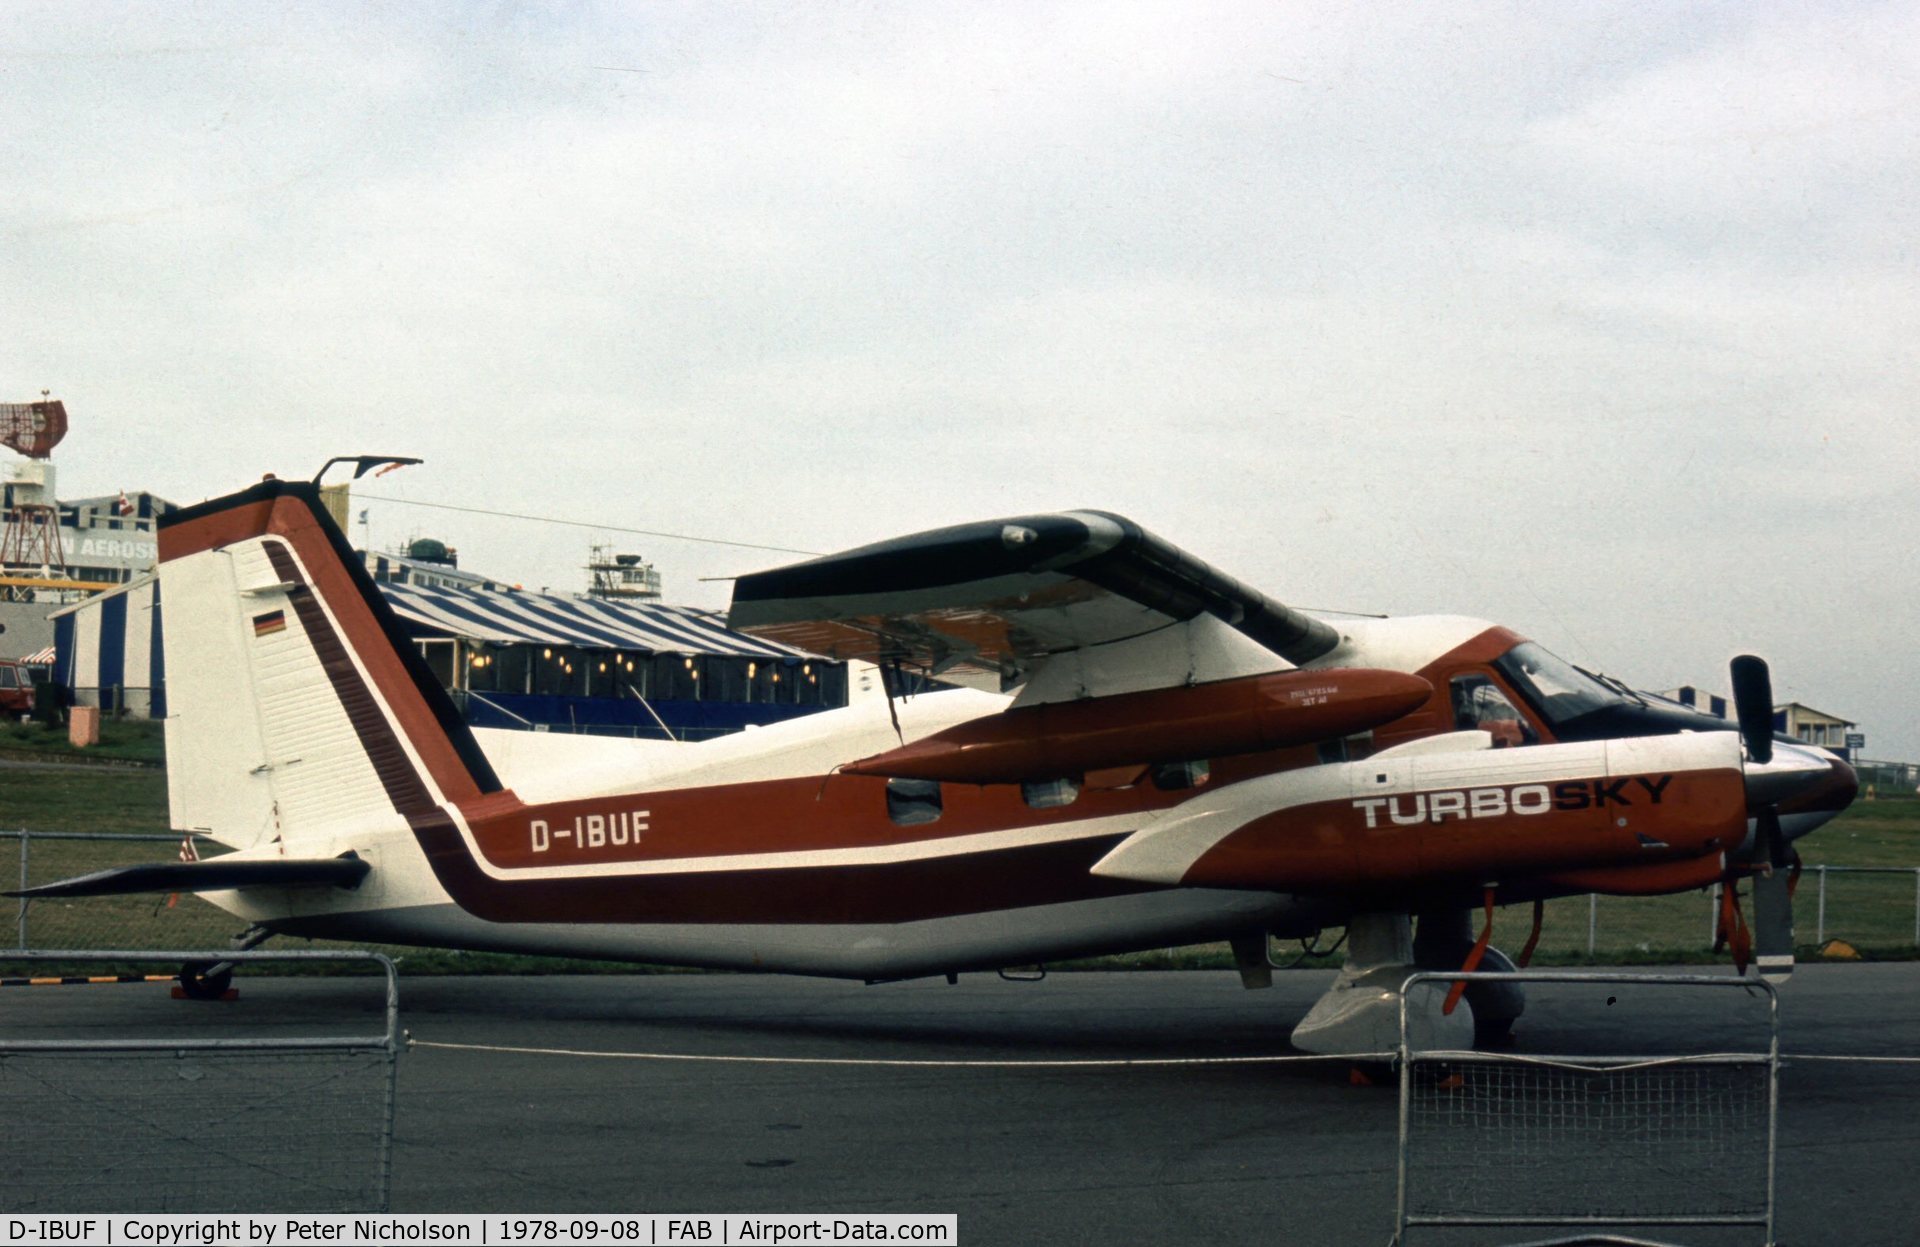 D-IBUF, 1978 Dornier Do-28D-2 Turbo Skyservant C/N 4302, Turboprop version of the Skyservant on display at the 1978 Farnborough Airshow.